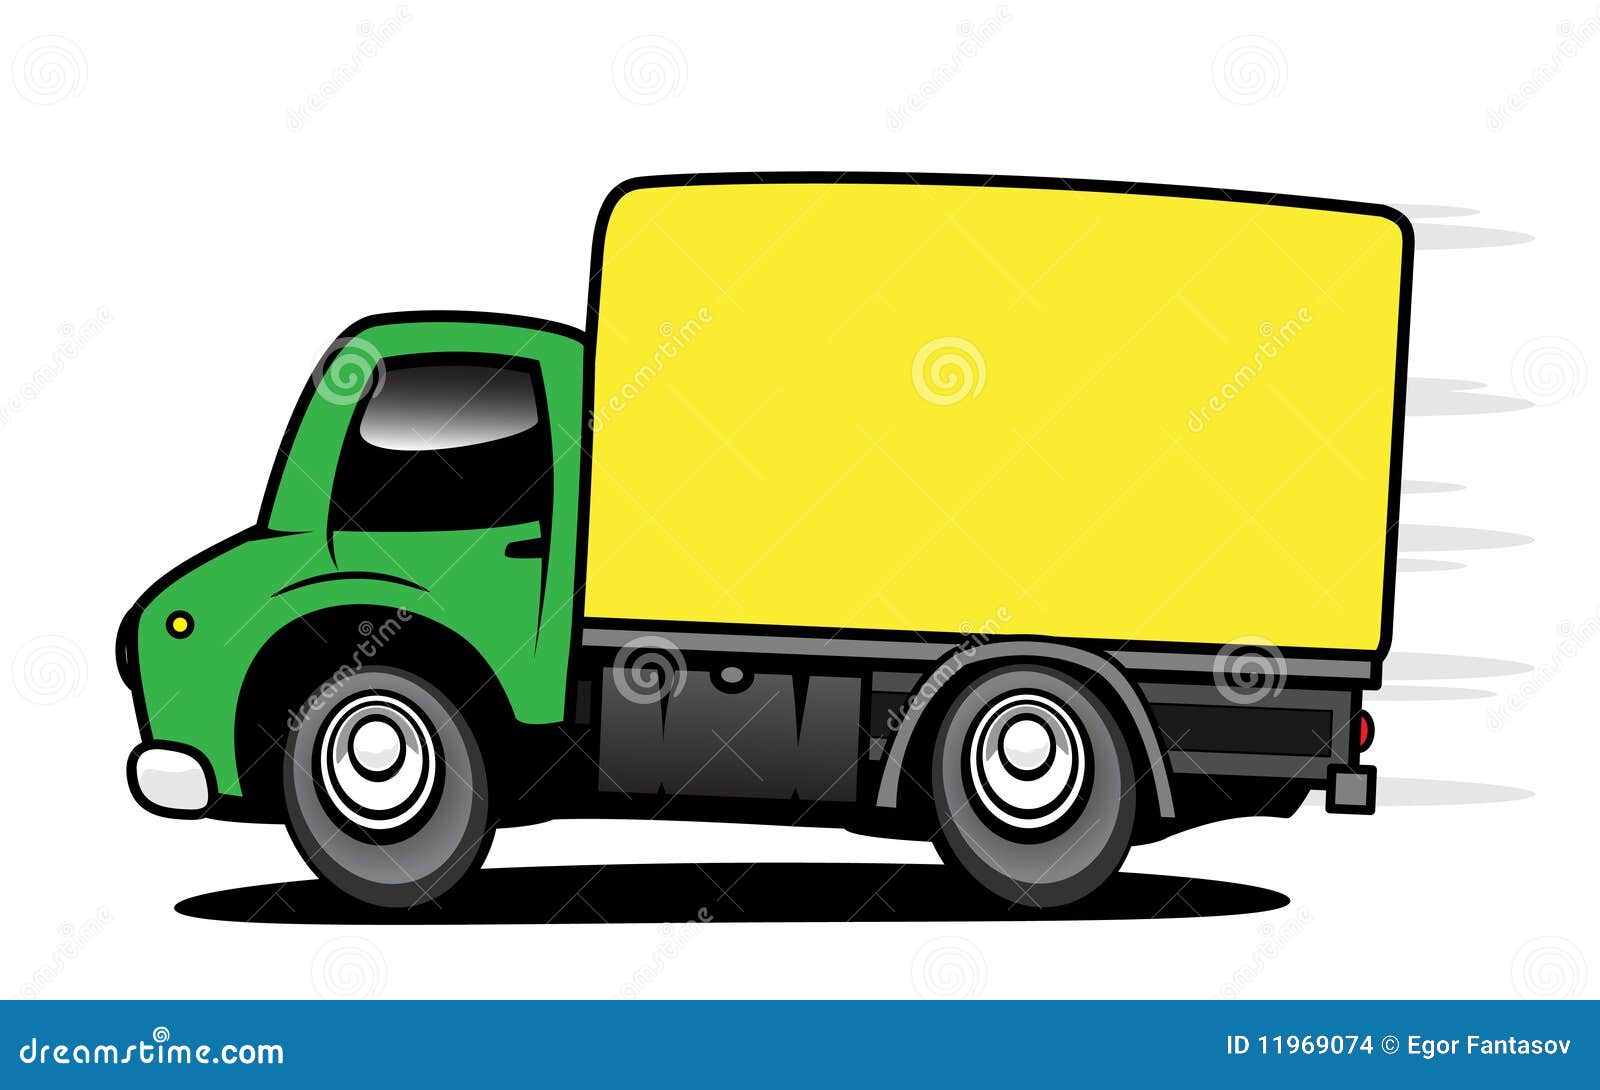 clipart of delivery truck - photo #50